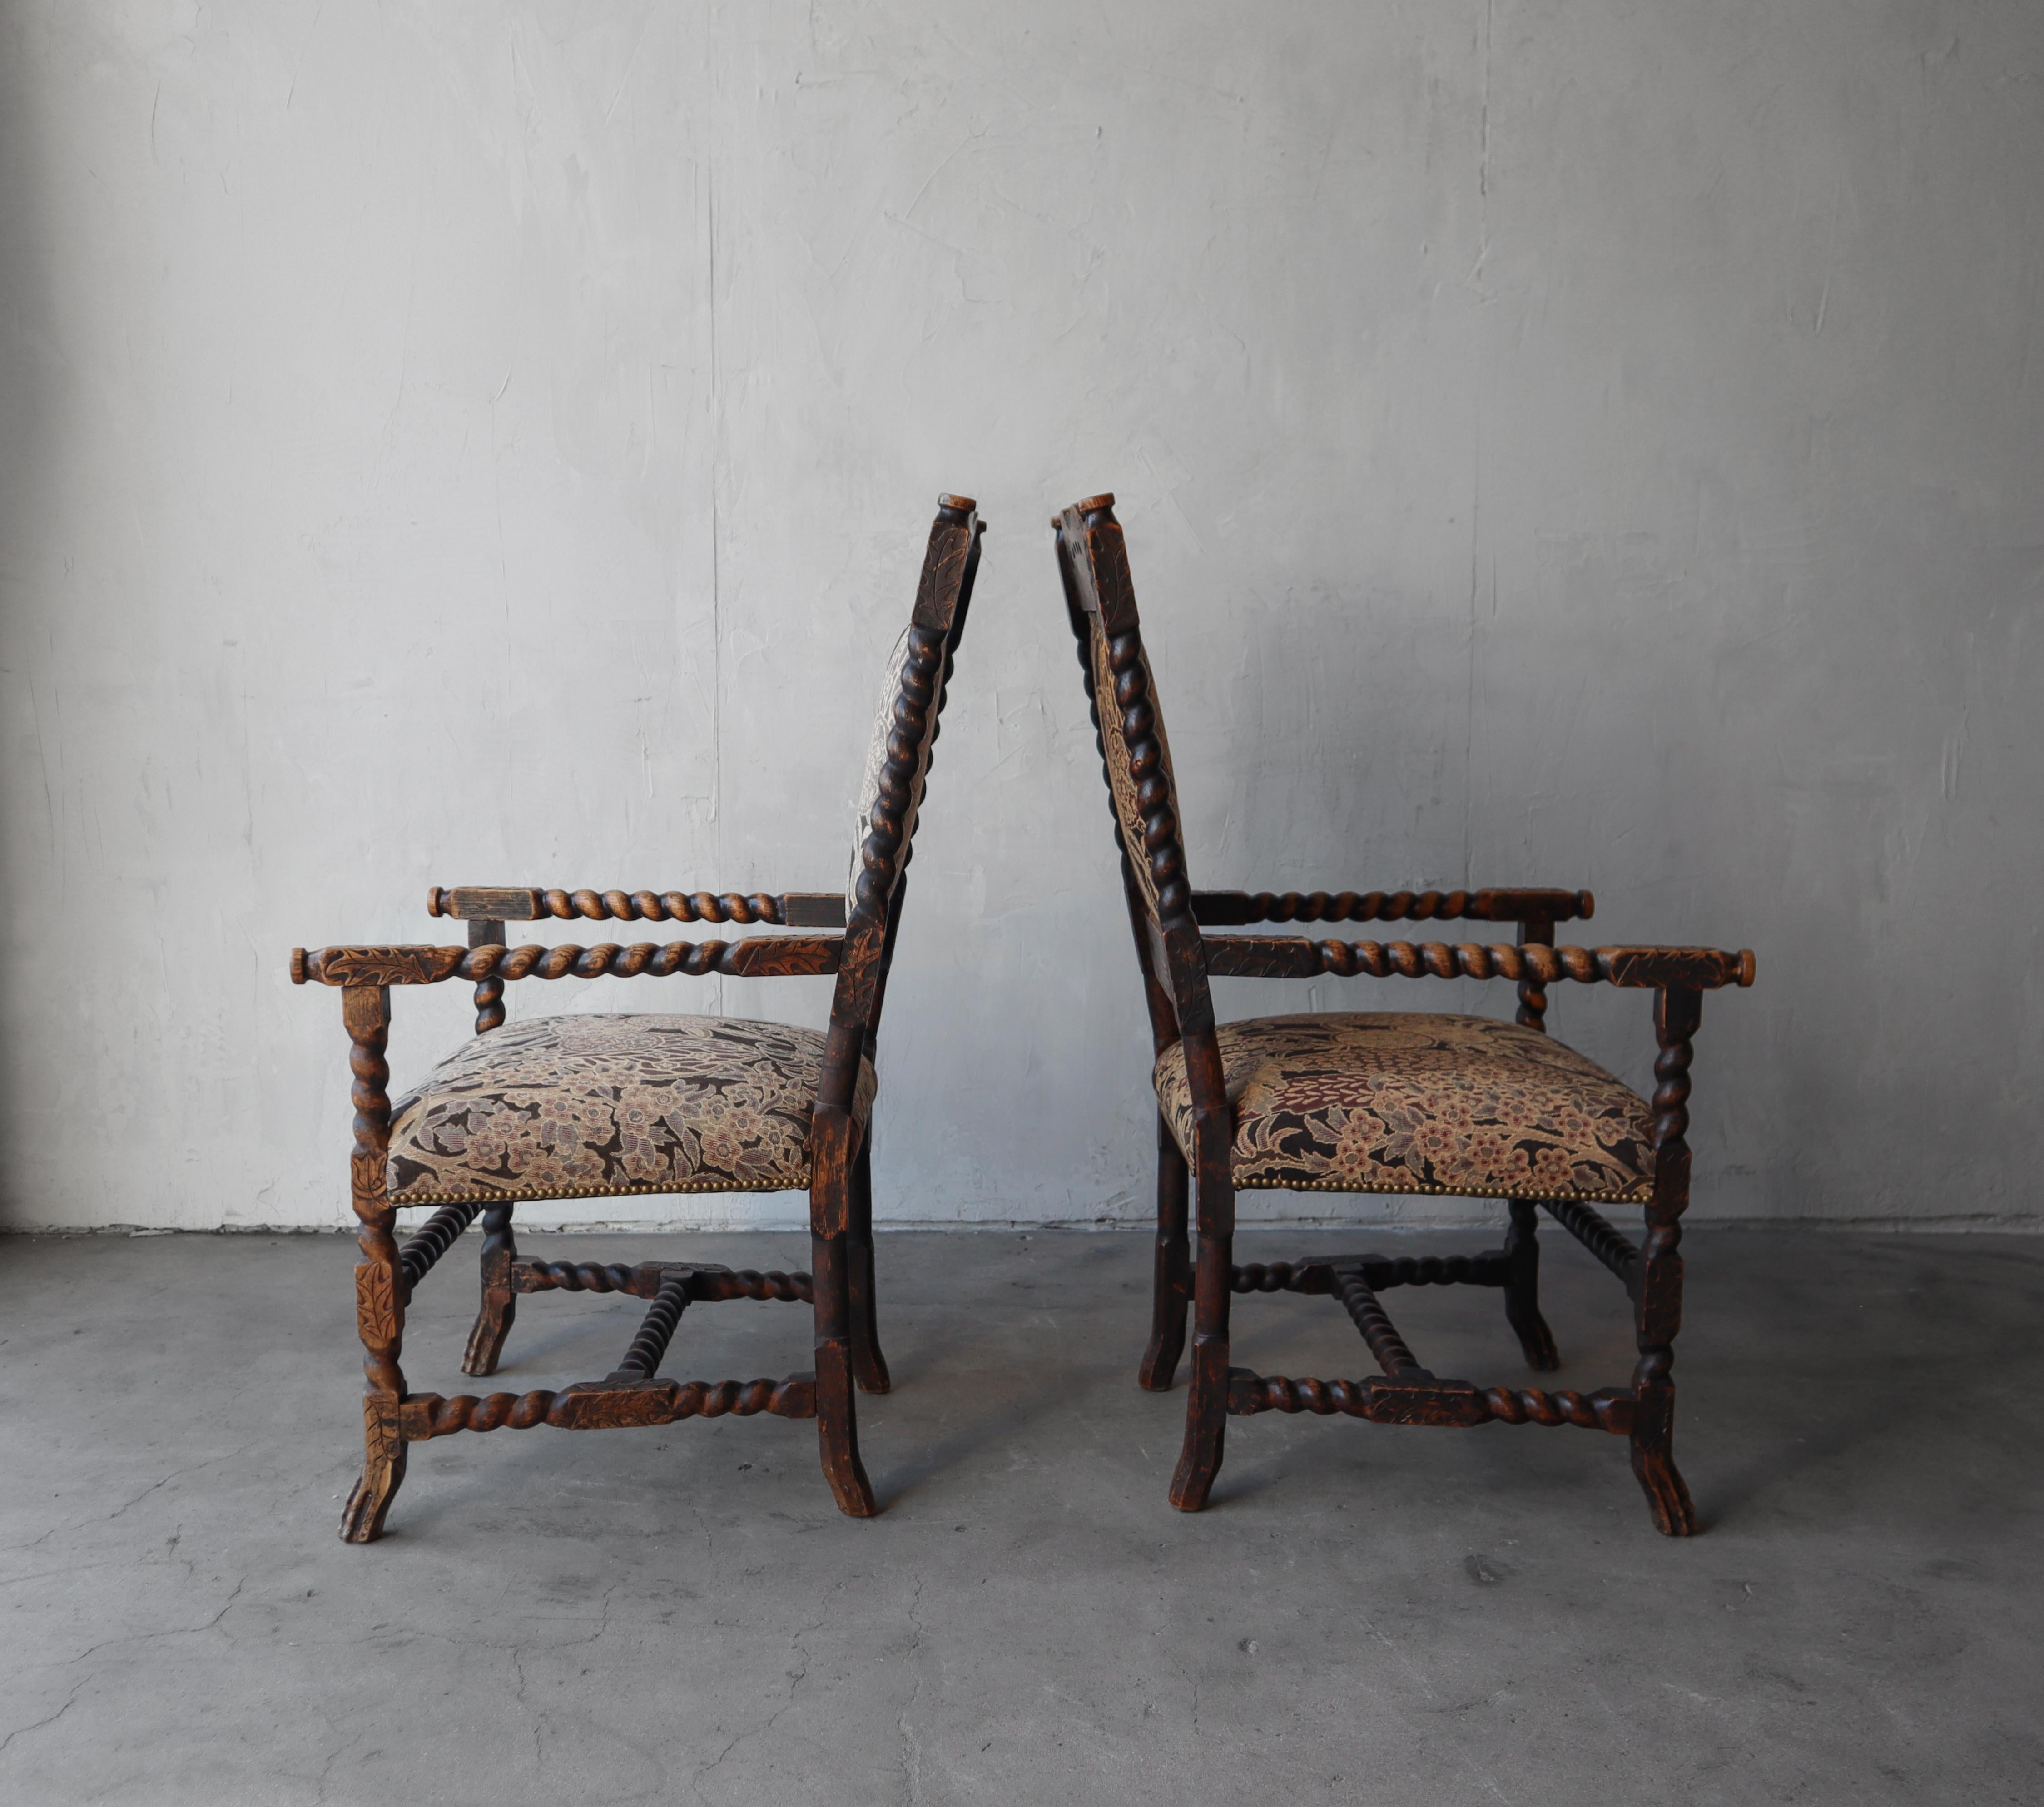 vintage wooden chairs with arms